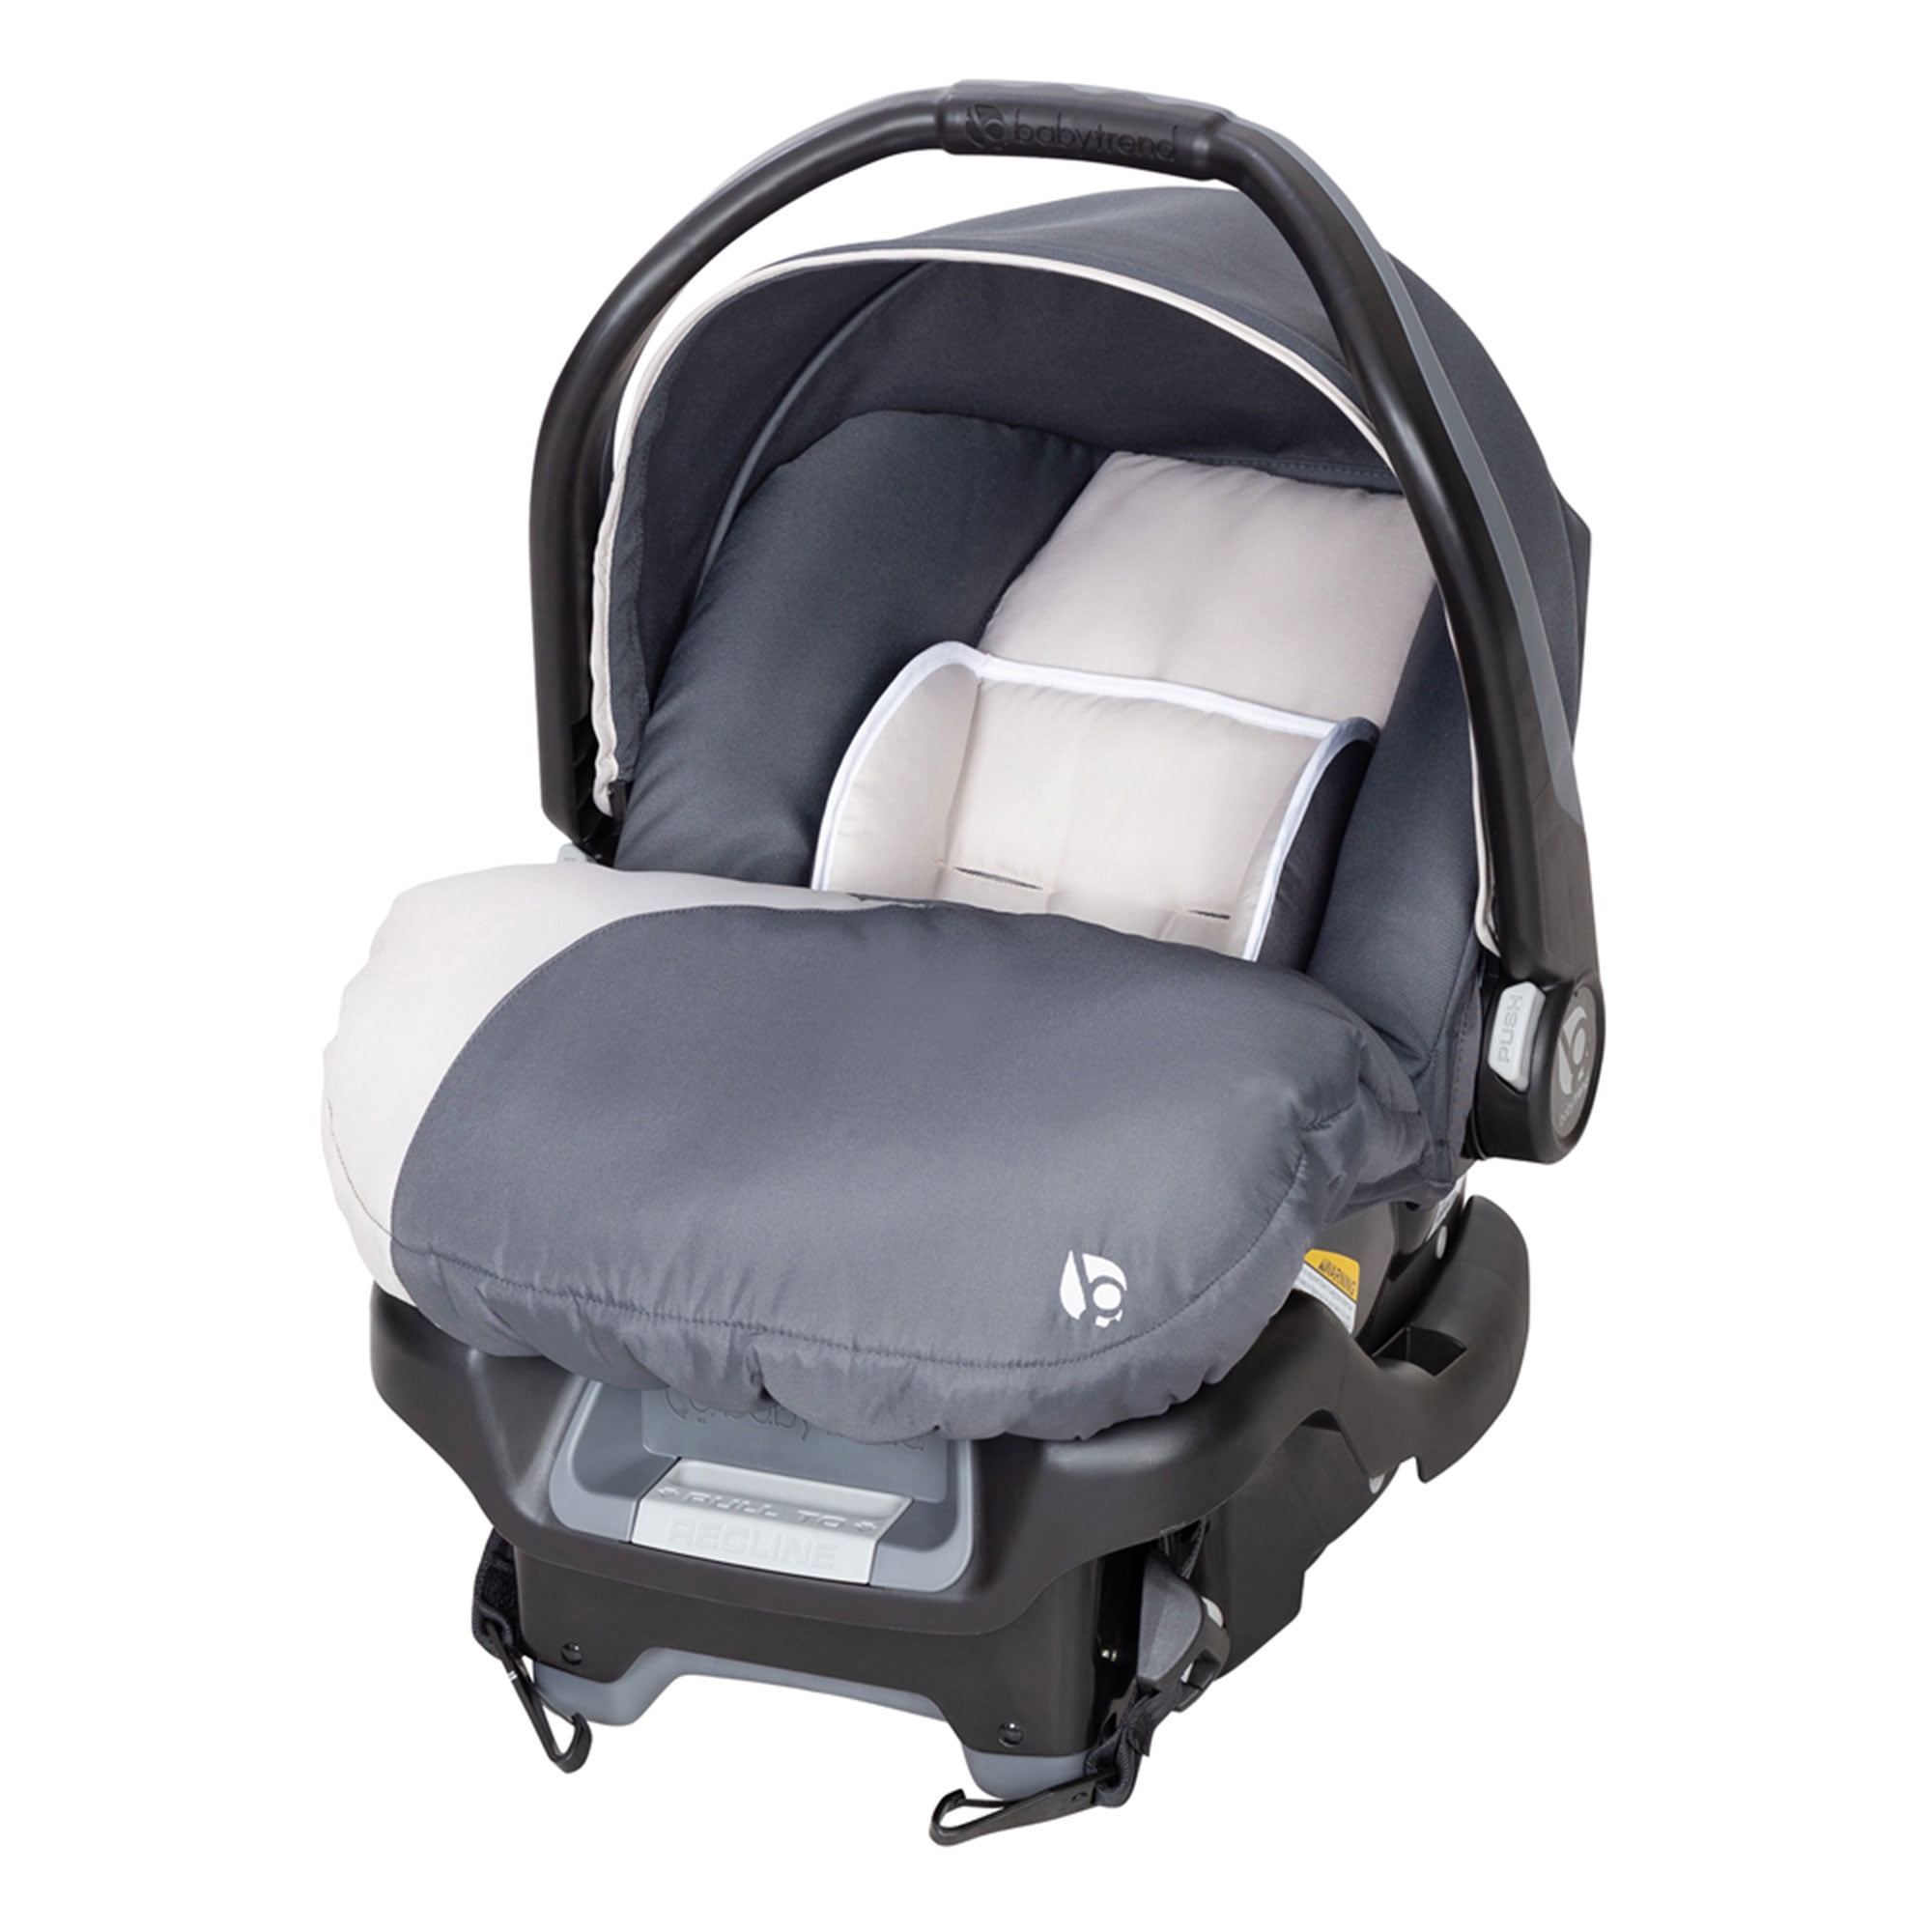 Graco Slimfit 3 in 1 Car Seat, Slim & Comfy Design Saves Space in Your Back  Seat (Annabelle, Slimfit)